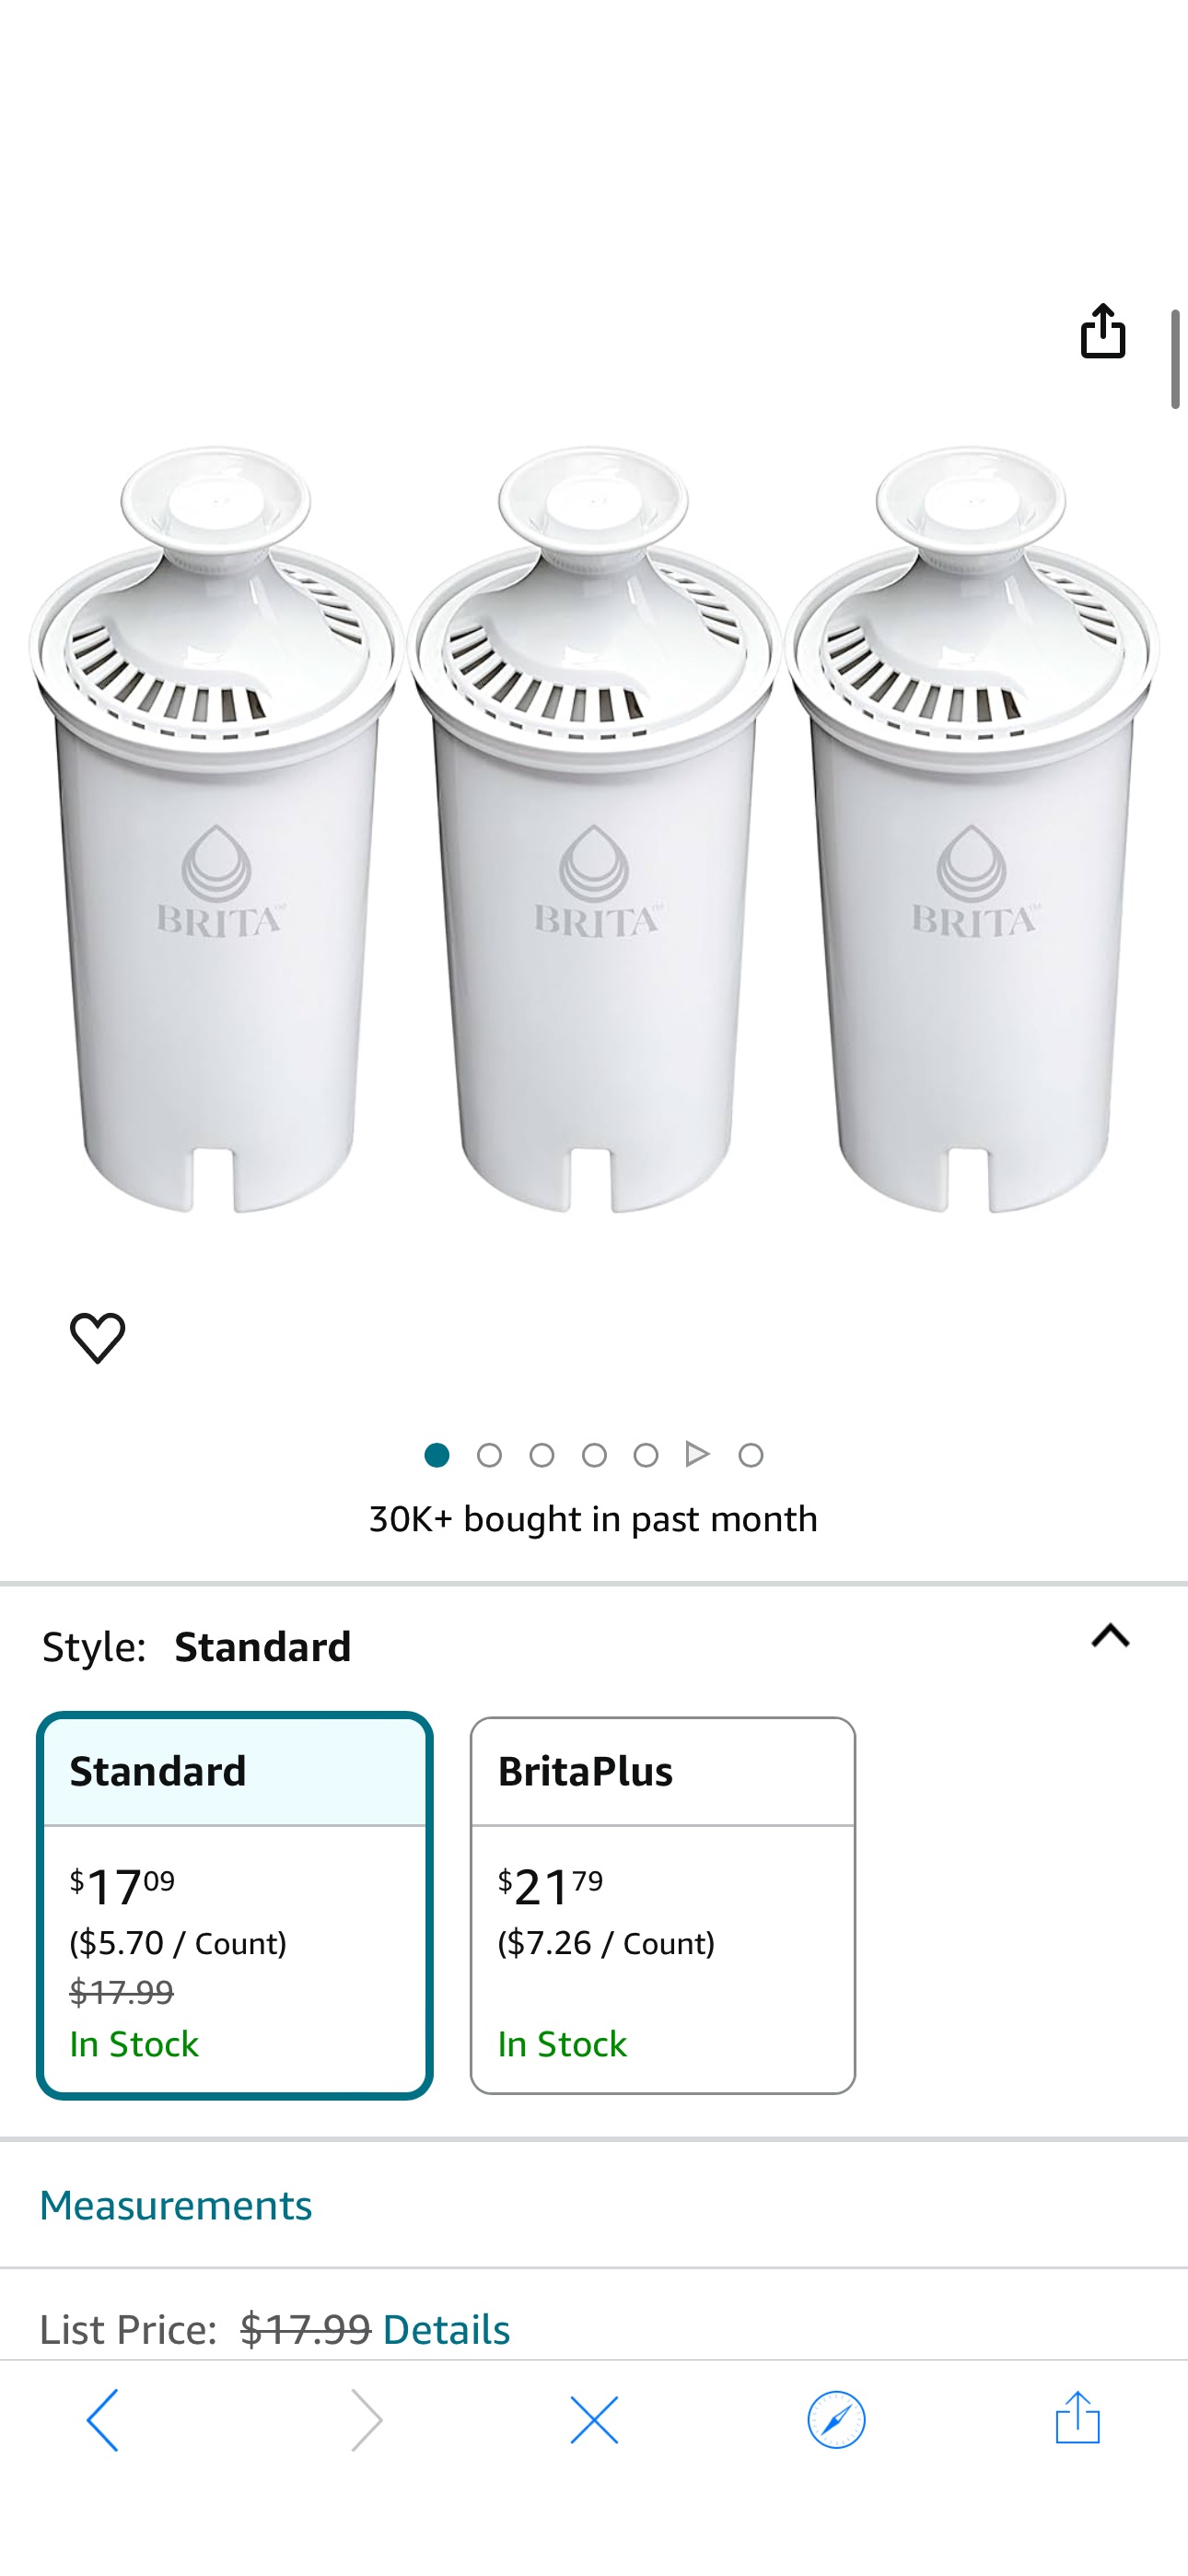 Amazon.com: Brita Standard Water Filter, BPA-Free, Replaces 1,800 Plastic Water Bottles a Year, Lasts Two Months or 40 Gallons, Includes 3 Filters, Kitchen Essential, White省$4